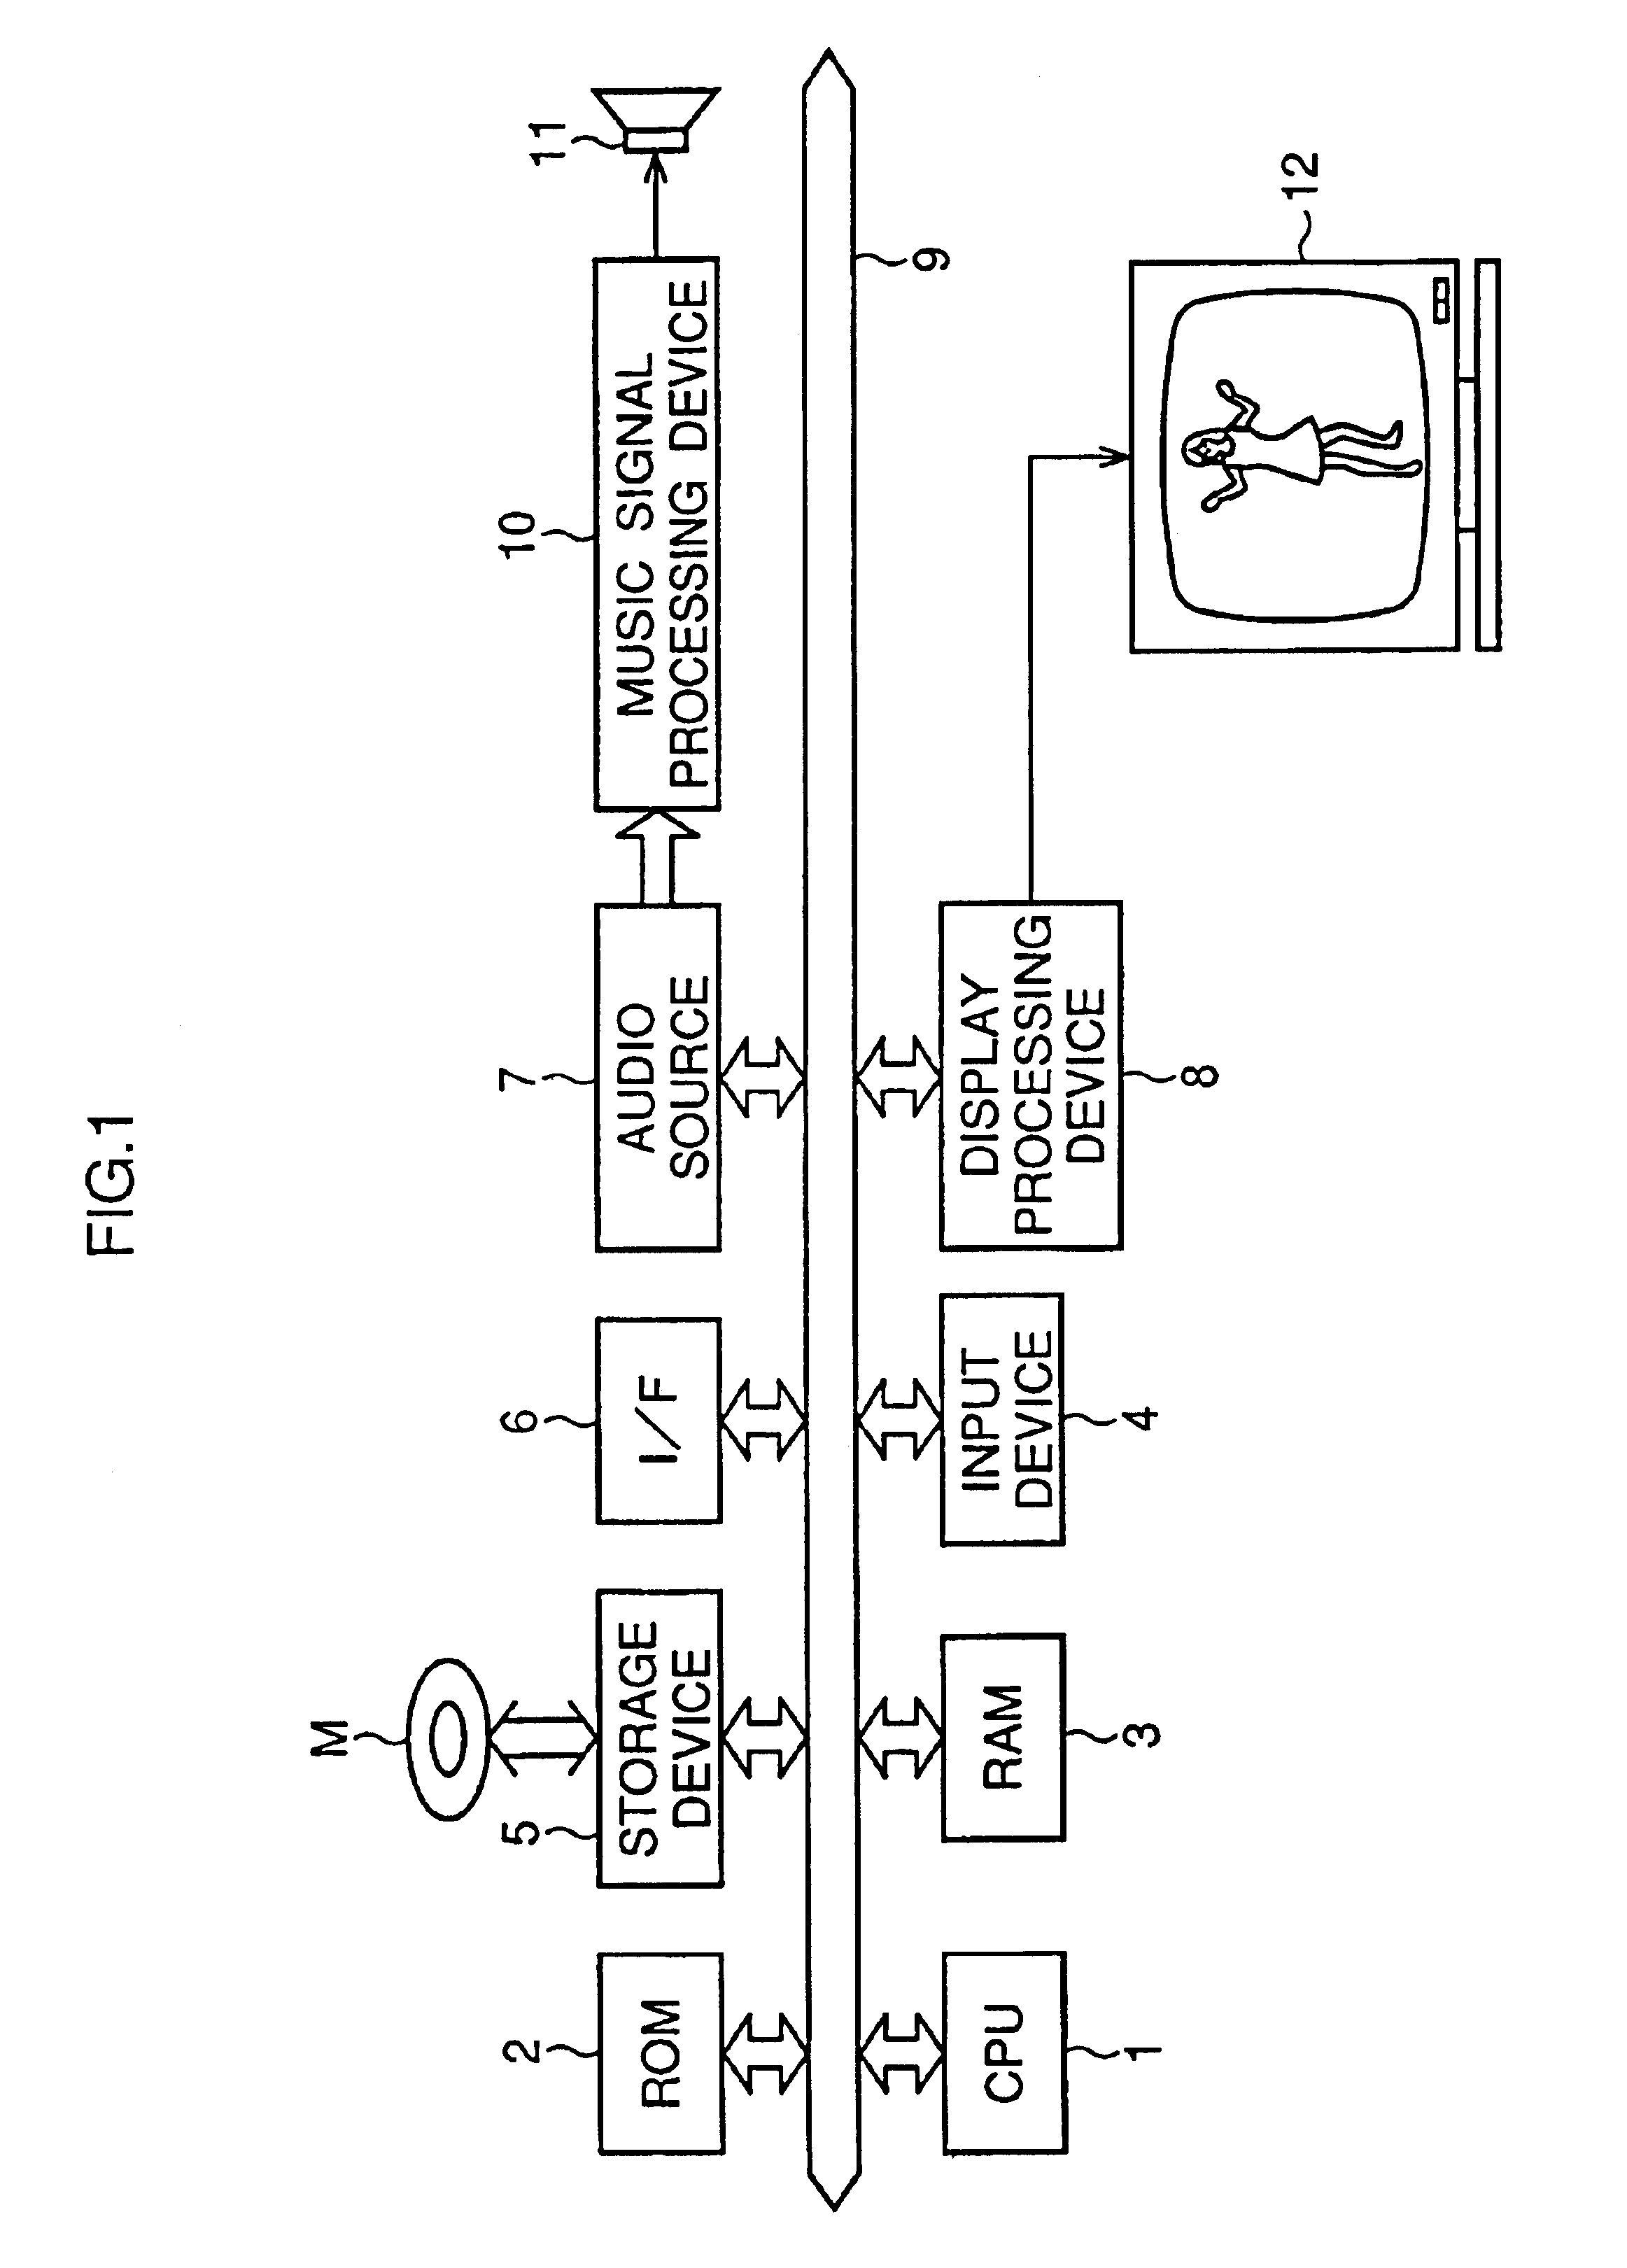 System of generating motion picture responsive to music